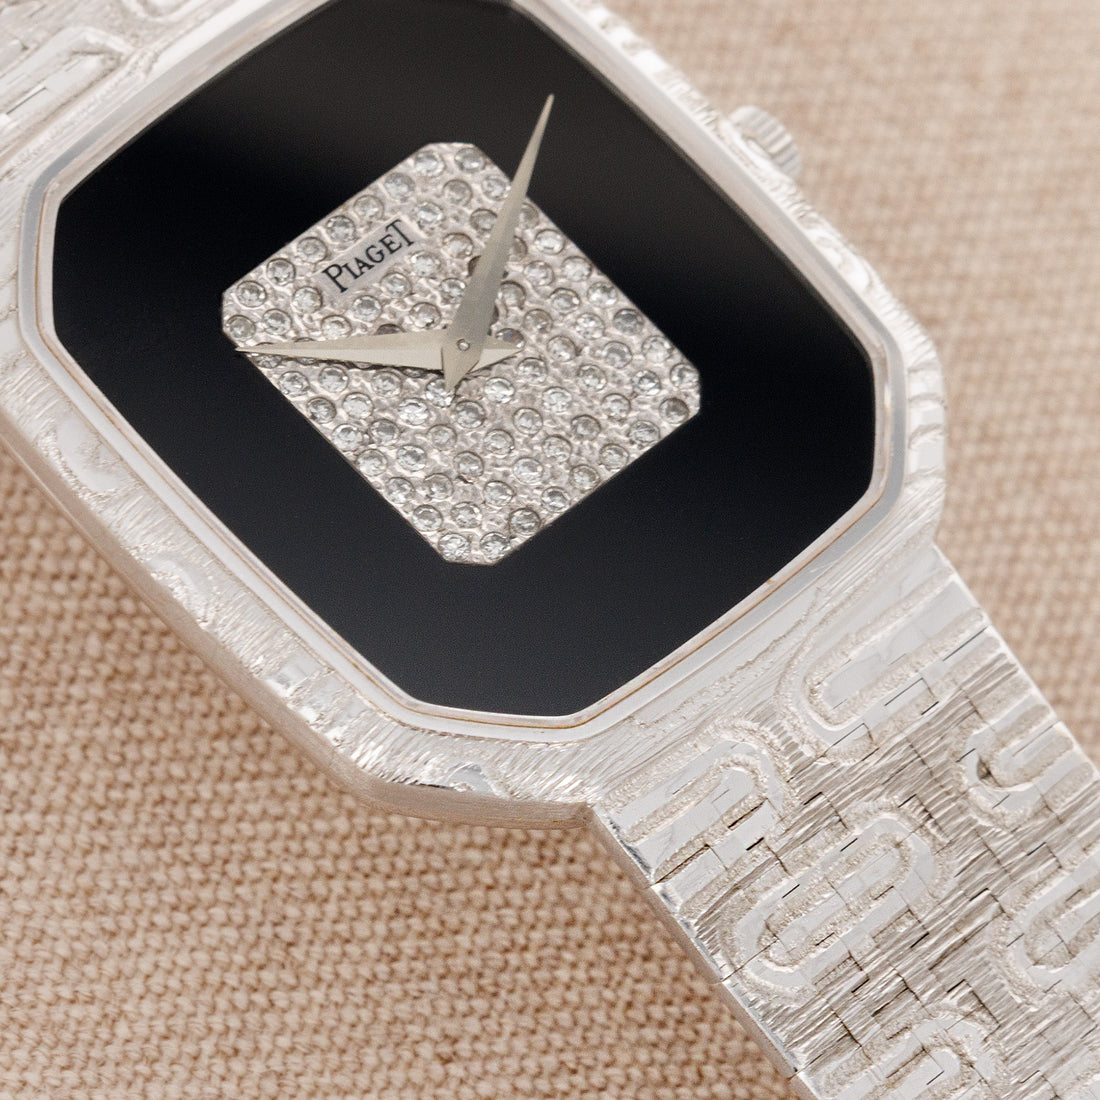 Piaget White Gold Onyx and Diamond Watch Ref. 9791A15